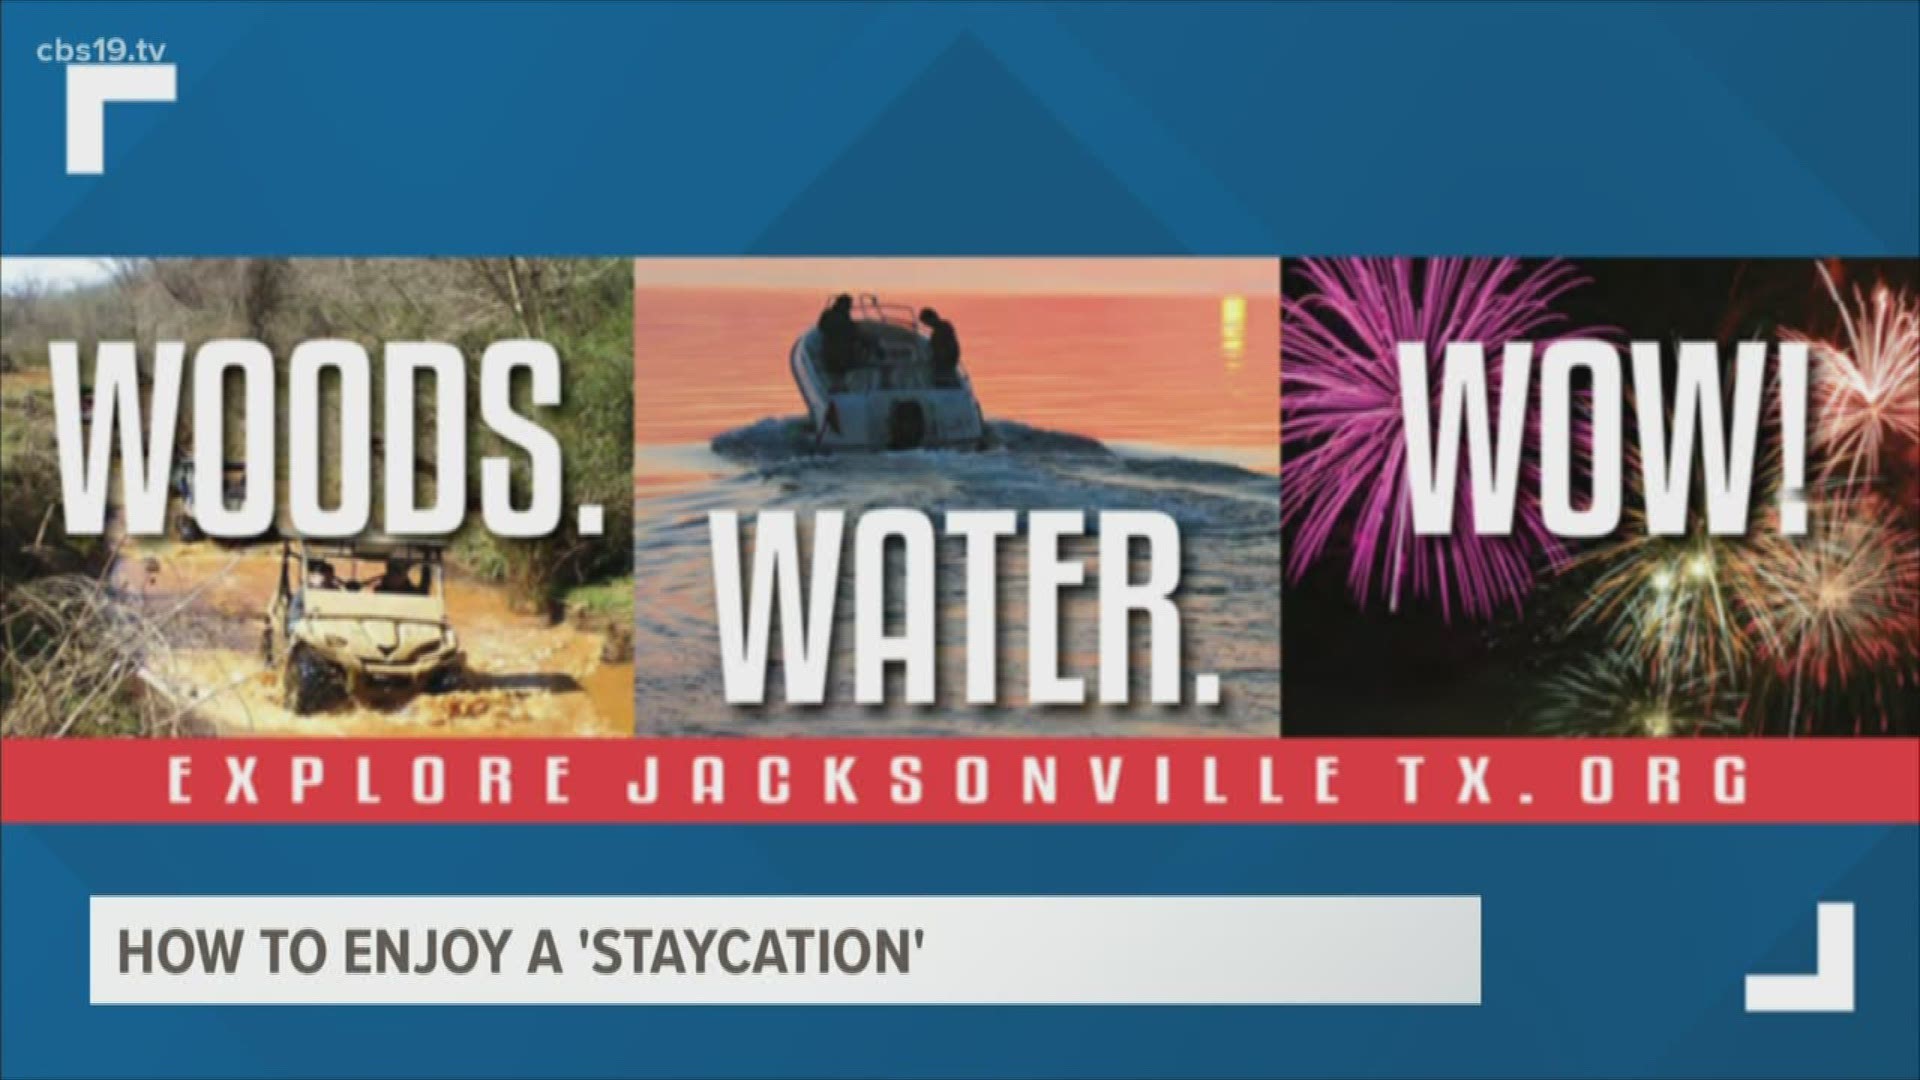 The City of Jacksonville put together a map of popular sites across the area.